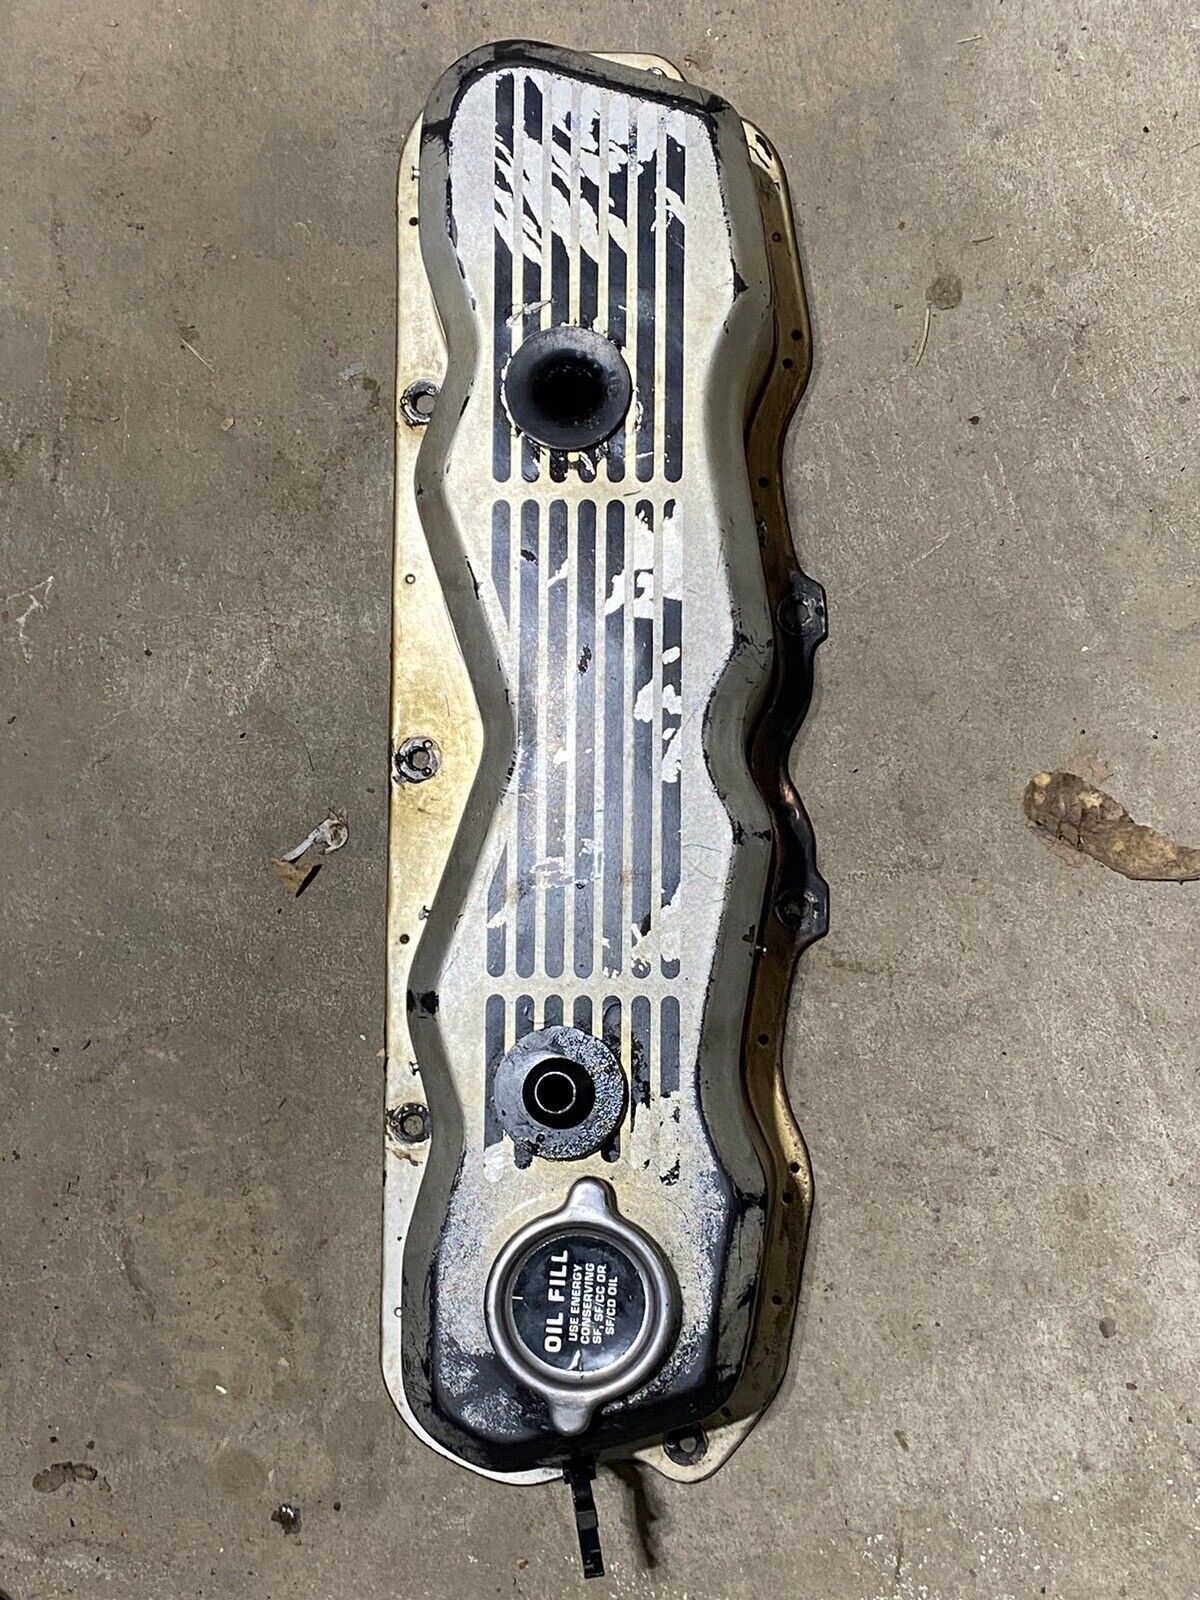 Fiero Valve Cover For Indy Pace Car or any Fiero 2.5 Iron Duke